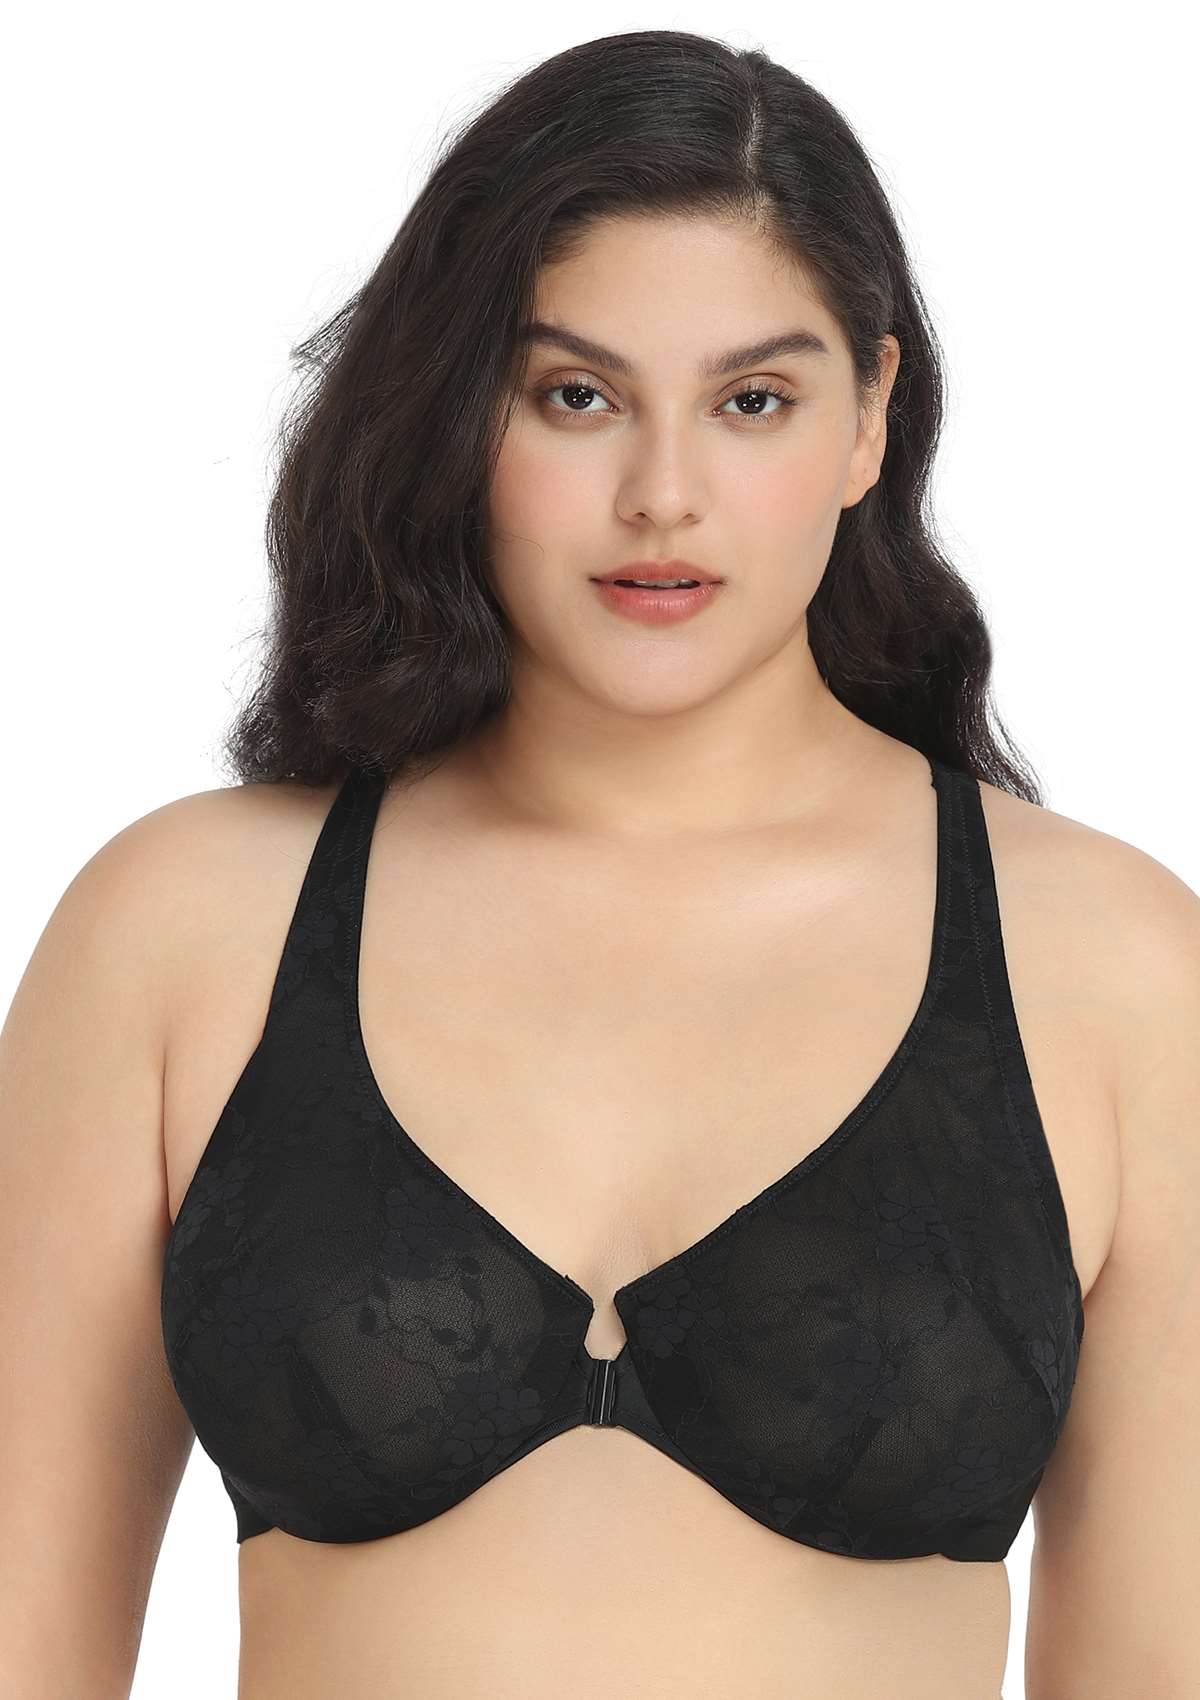 HSIA Spring Romance Front-Close Floral Lace Unlined Full Coverage Bra - Black / 34 / G